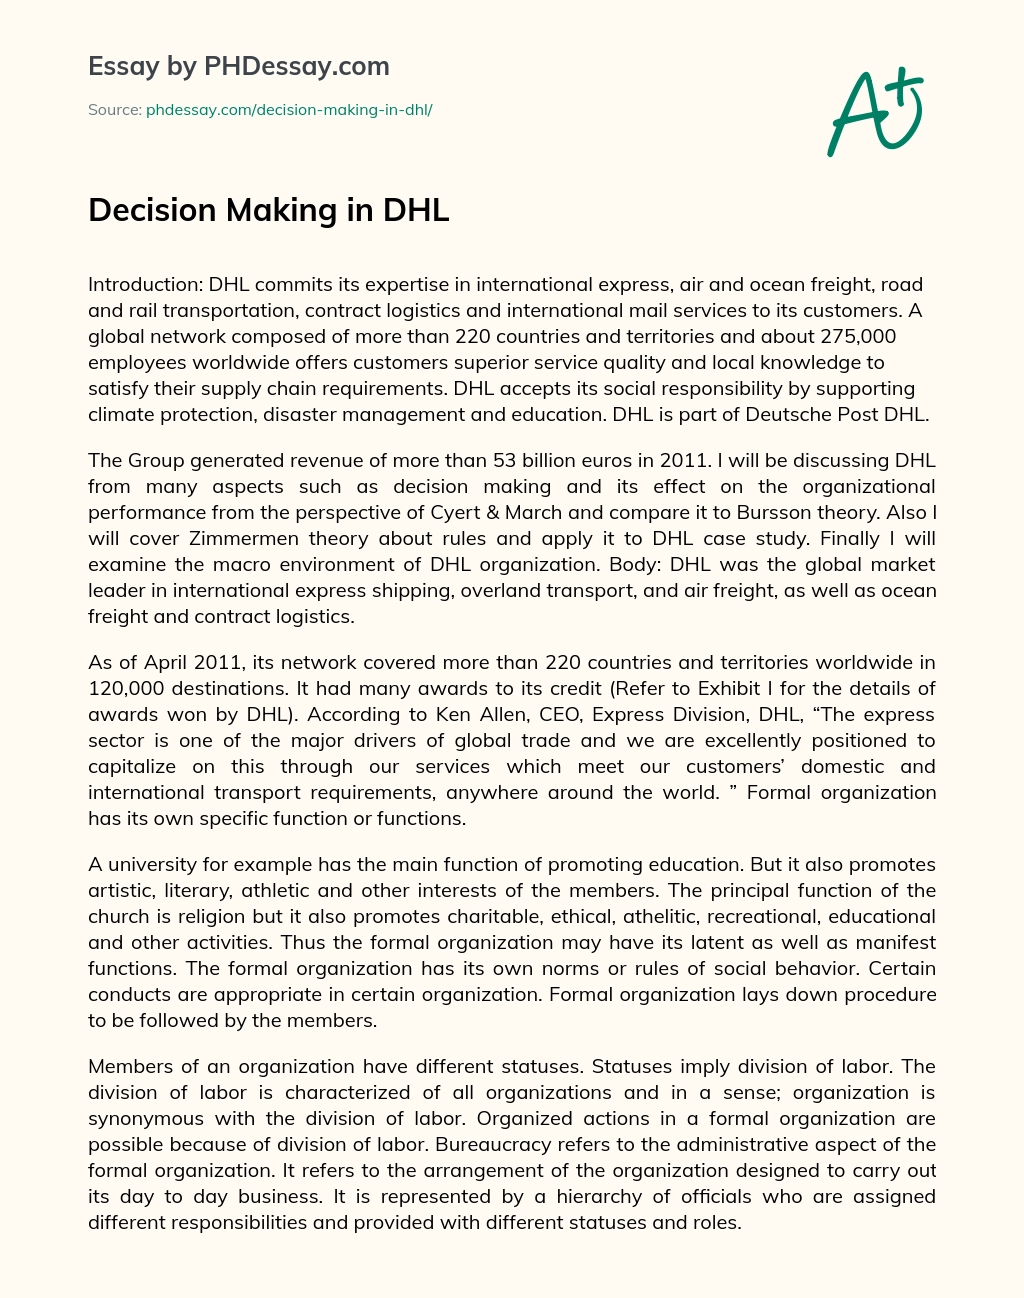 Decision Making in DHL essay